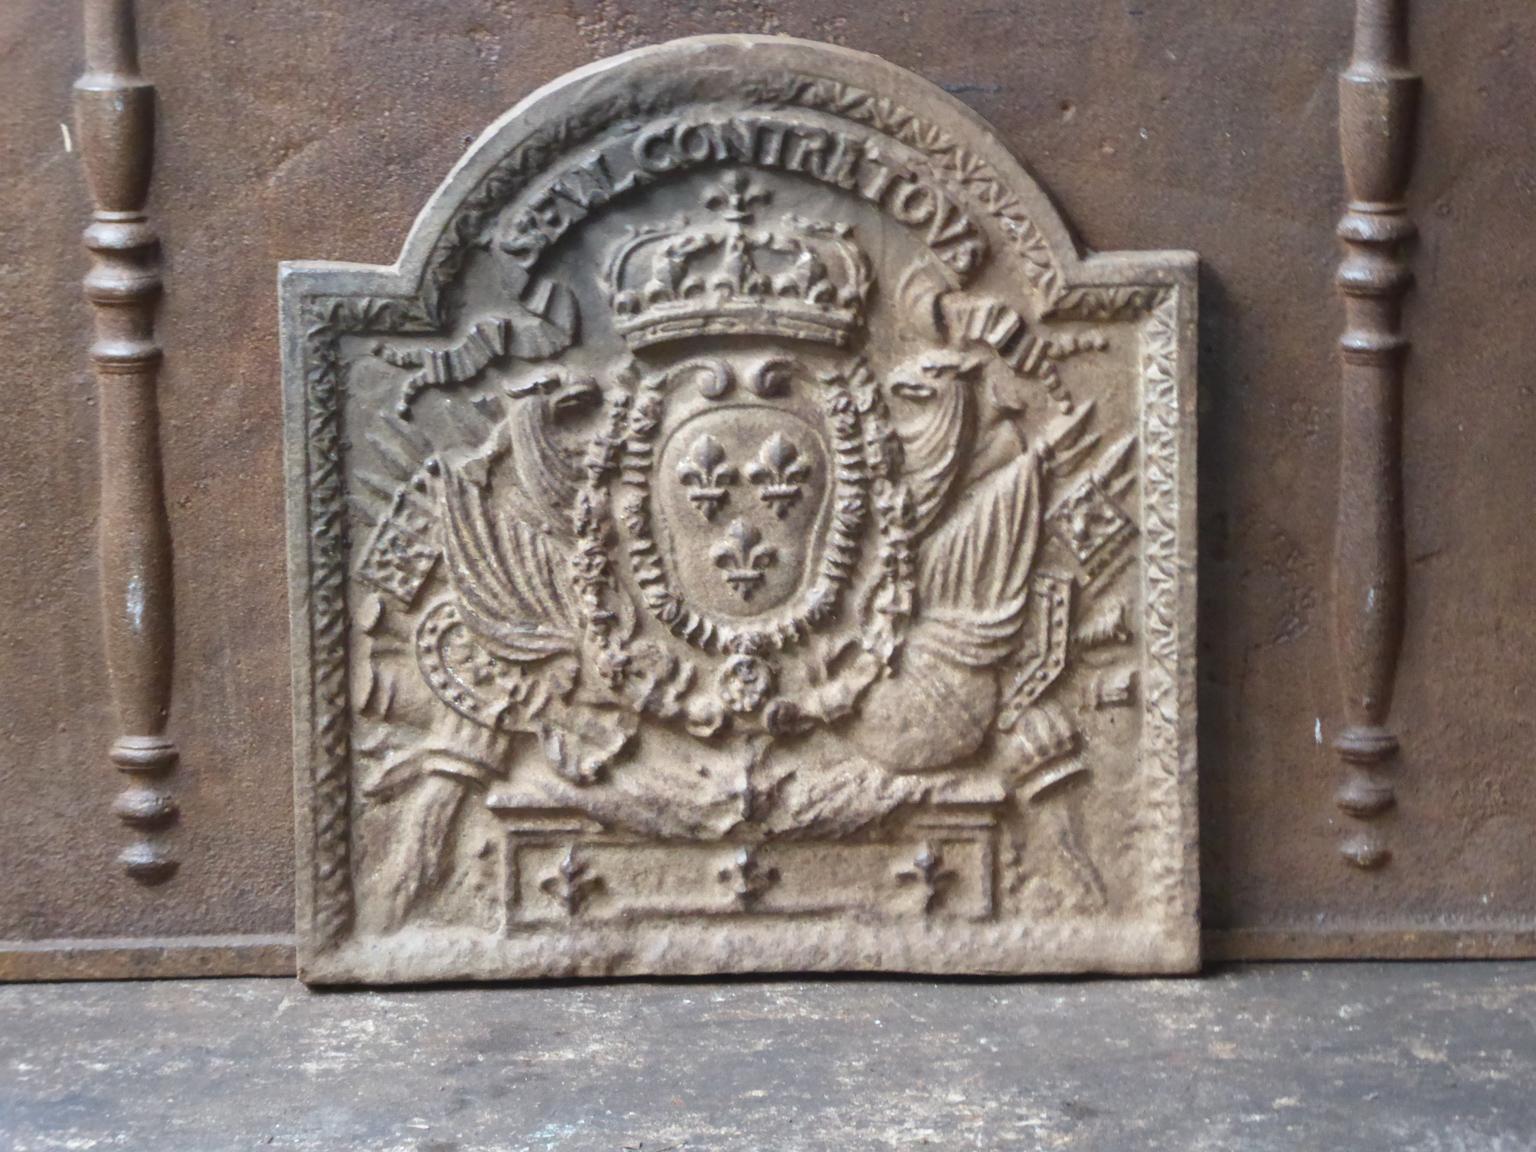 French Louis XIV style fireback with the arms of France and the inscription 'Seul contre Tous or 'All against One'. It symbolizes the French battle against the European coalition at the end of the 17th century. The coalition tried to restrict the